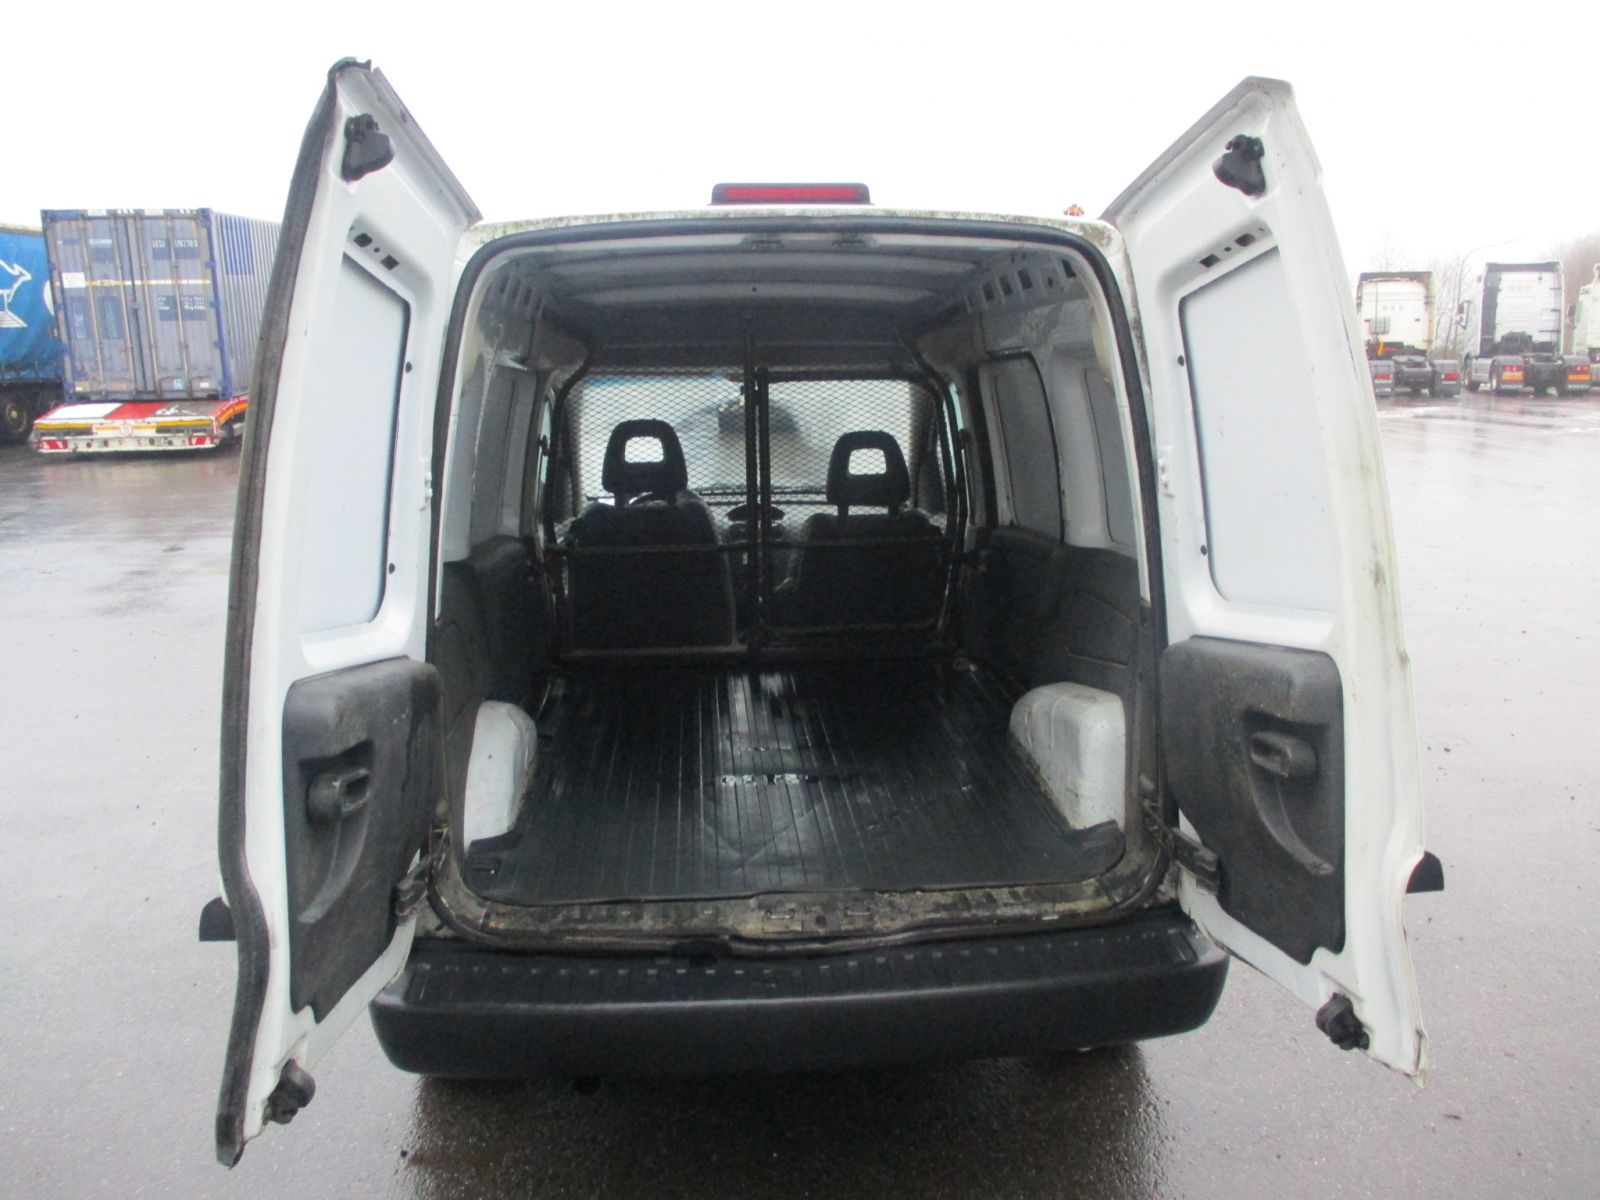 Vente occasion  Divers - OPEL Combo 1.3 CDTI  FOURGON (Belgique - Europe) - Houffalize Trading s.a.